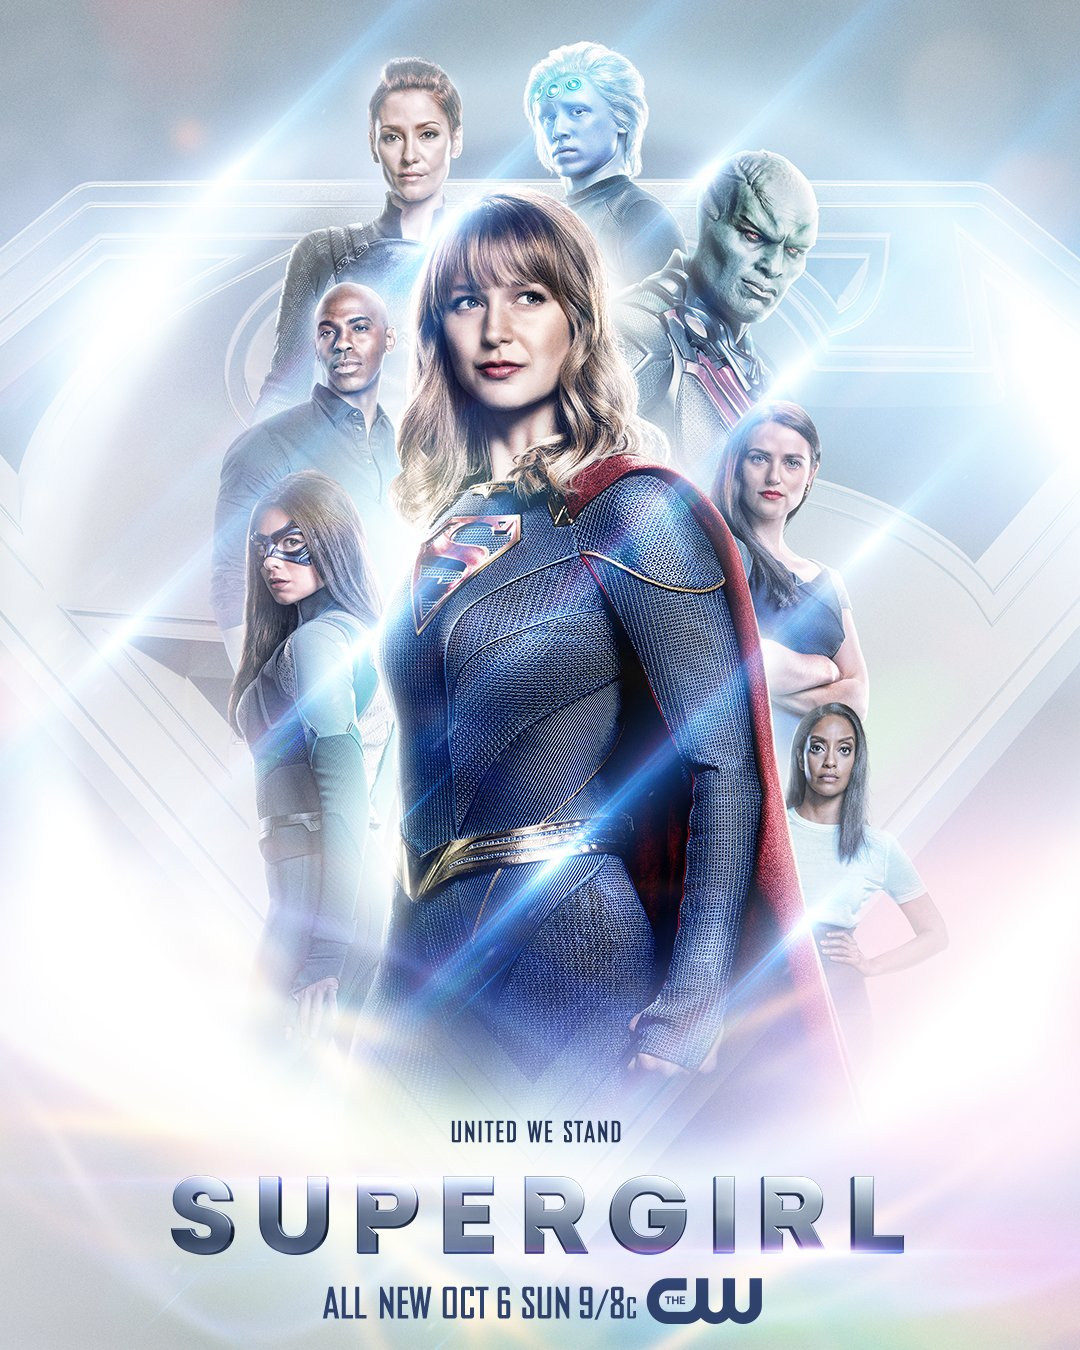 https://vignette.wikia.nocookie.net/arrow/images/1/1f/Supergirl_season_5_poster_-_United_We_Stand.png/revision/latest?cb=20190909011018